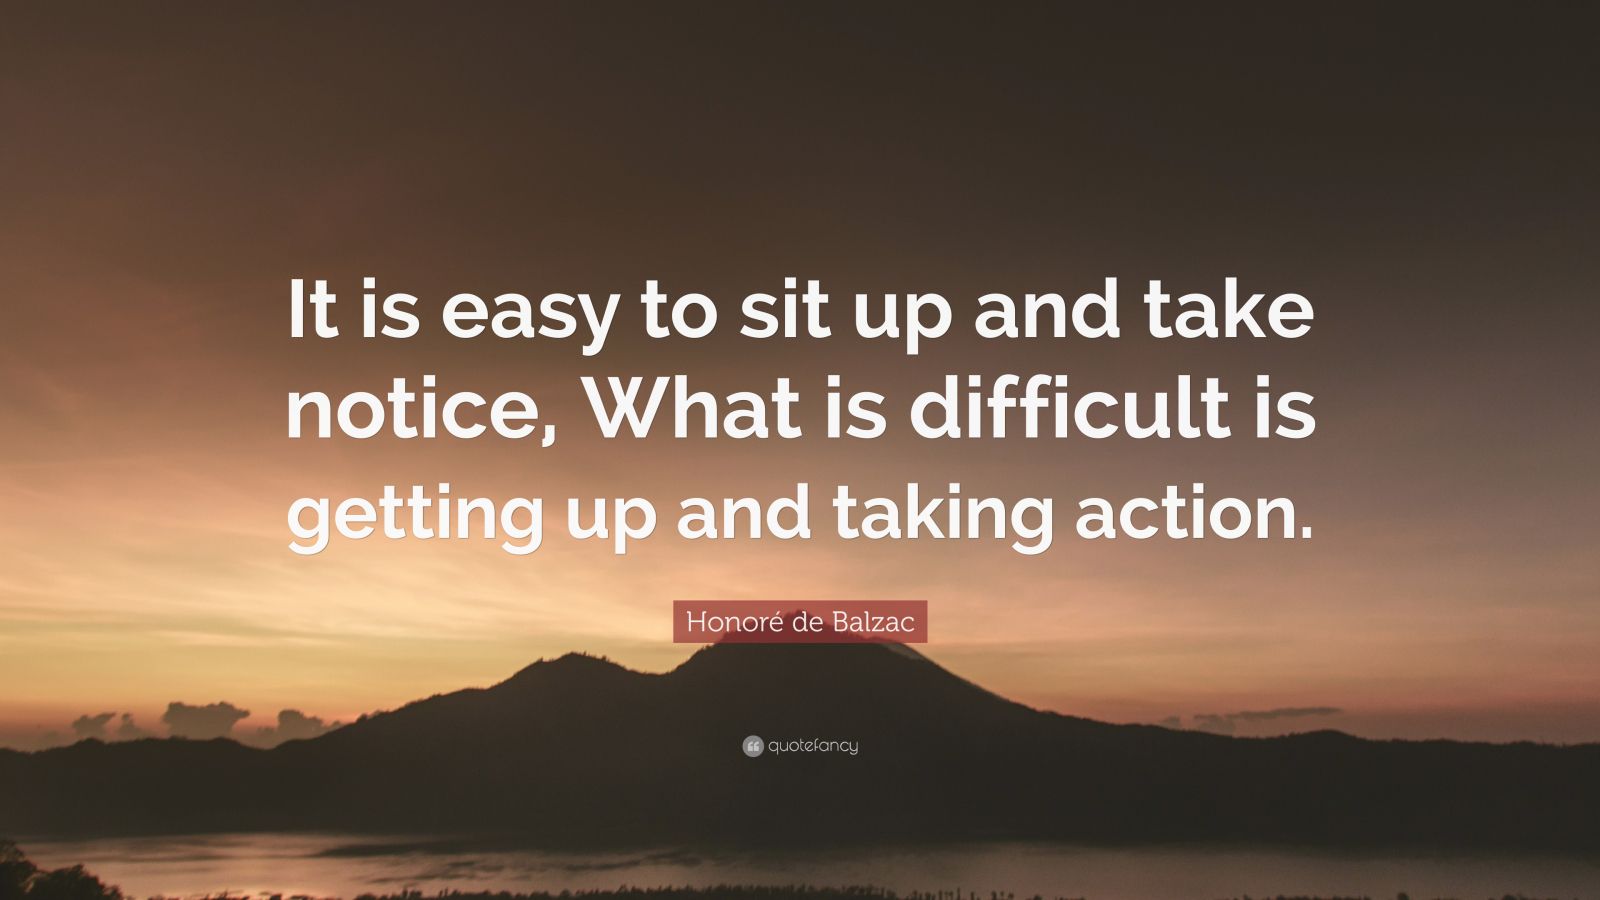 Honoré de Balzac Quote: “It is easy to sit up and take notice, What is difficult is ...